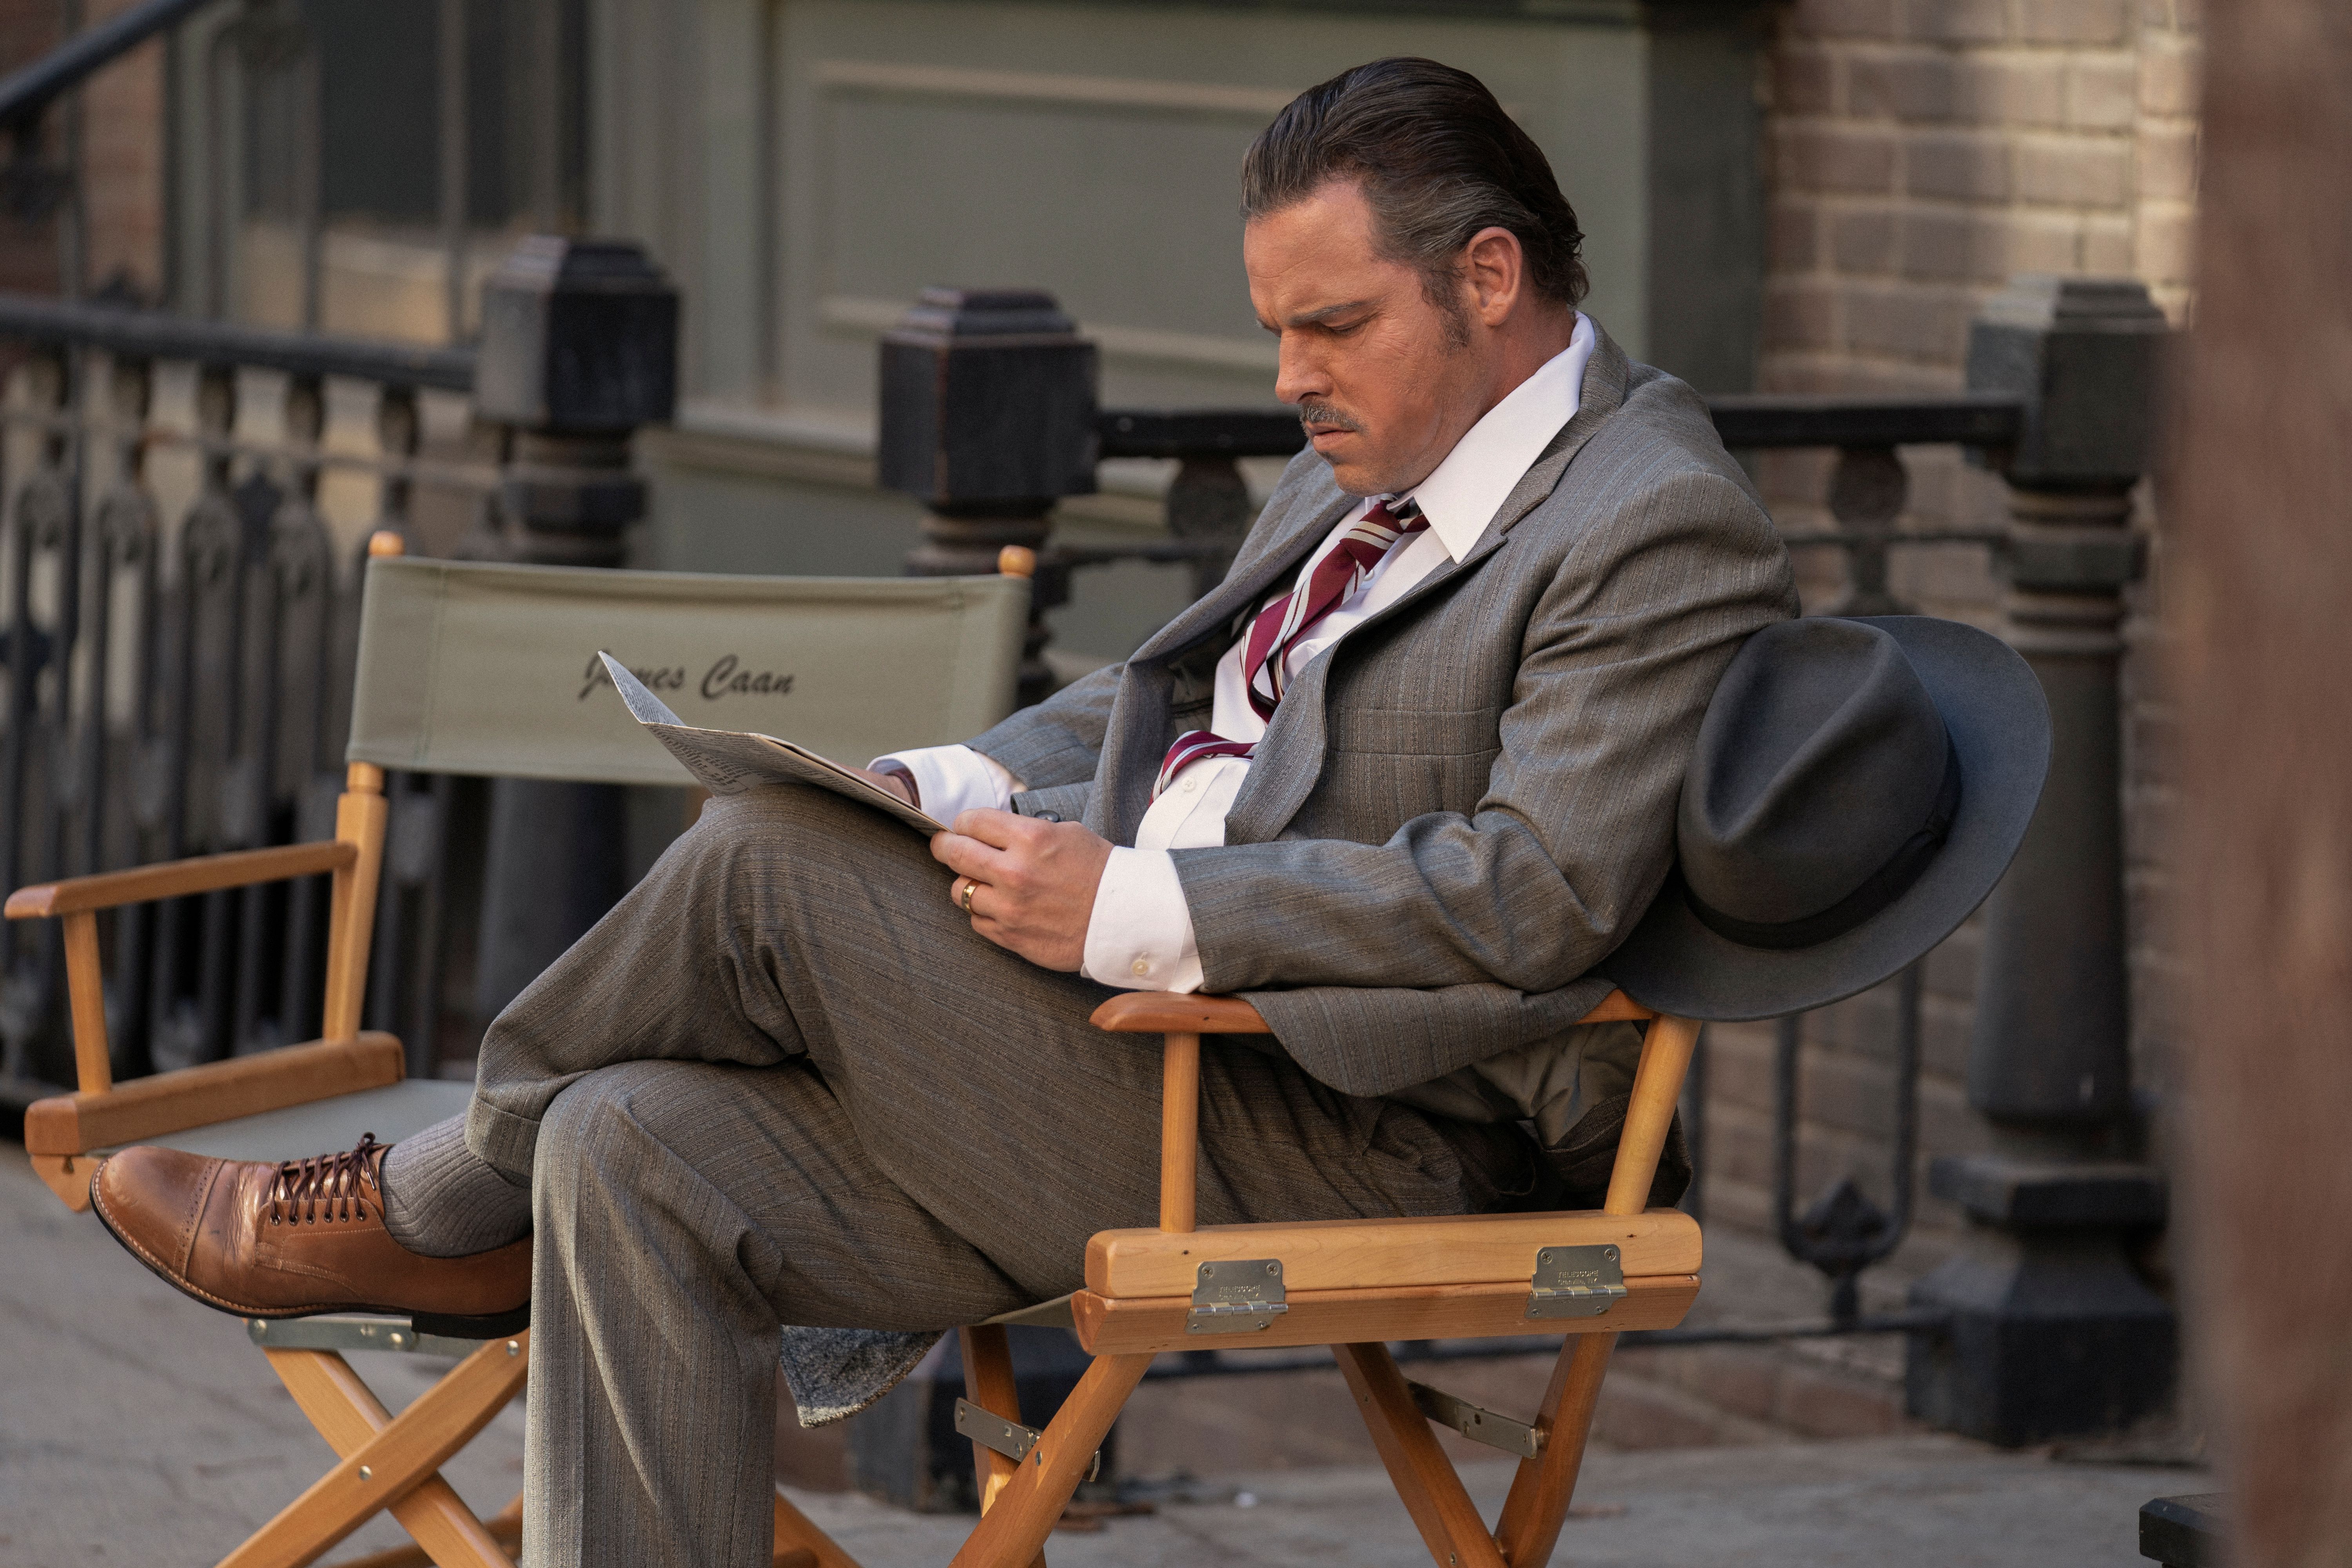 Pictured: Justin Chambers as Marlon Brando of the Paramount+ original series THE OFFER. Photo Cr: Nicole Wilder/Paramount+ ©2022 Paramount Pictures. All Rights Reserved.